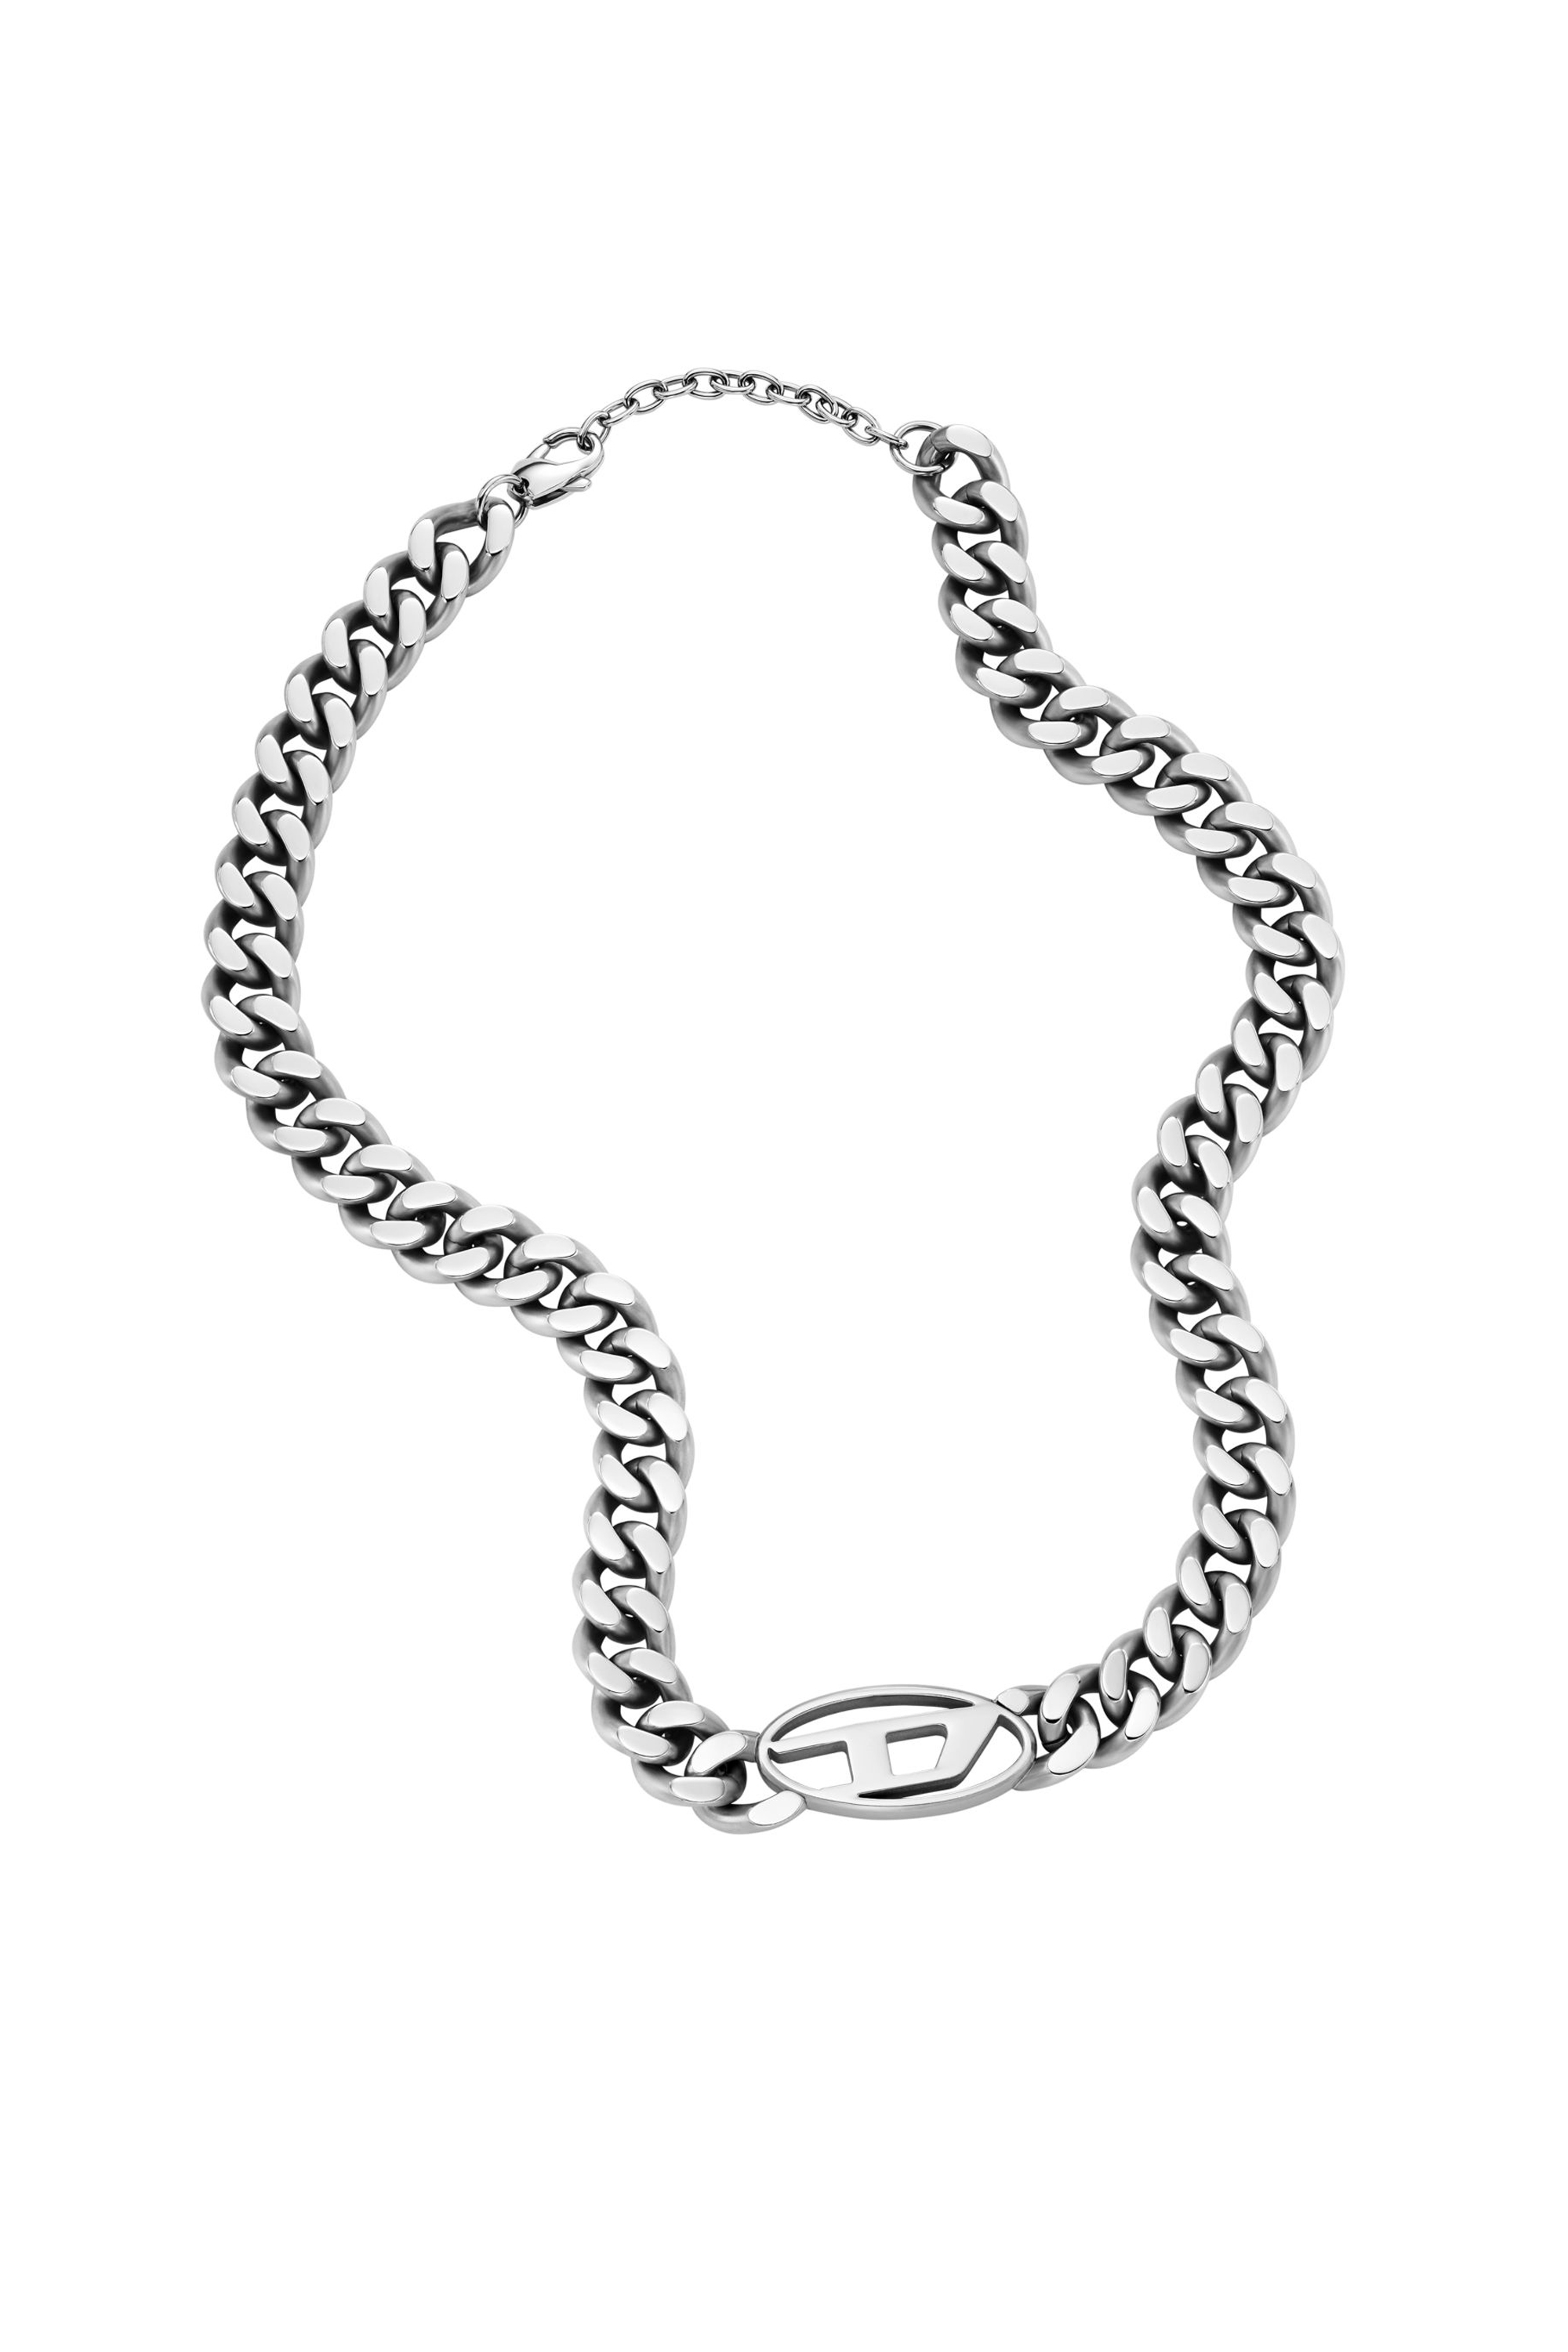 Men's Necklaces: Stainless Steel, Chain